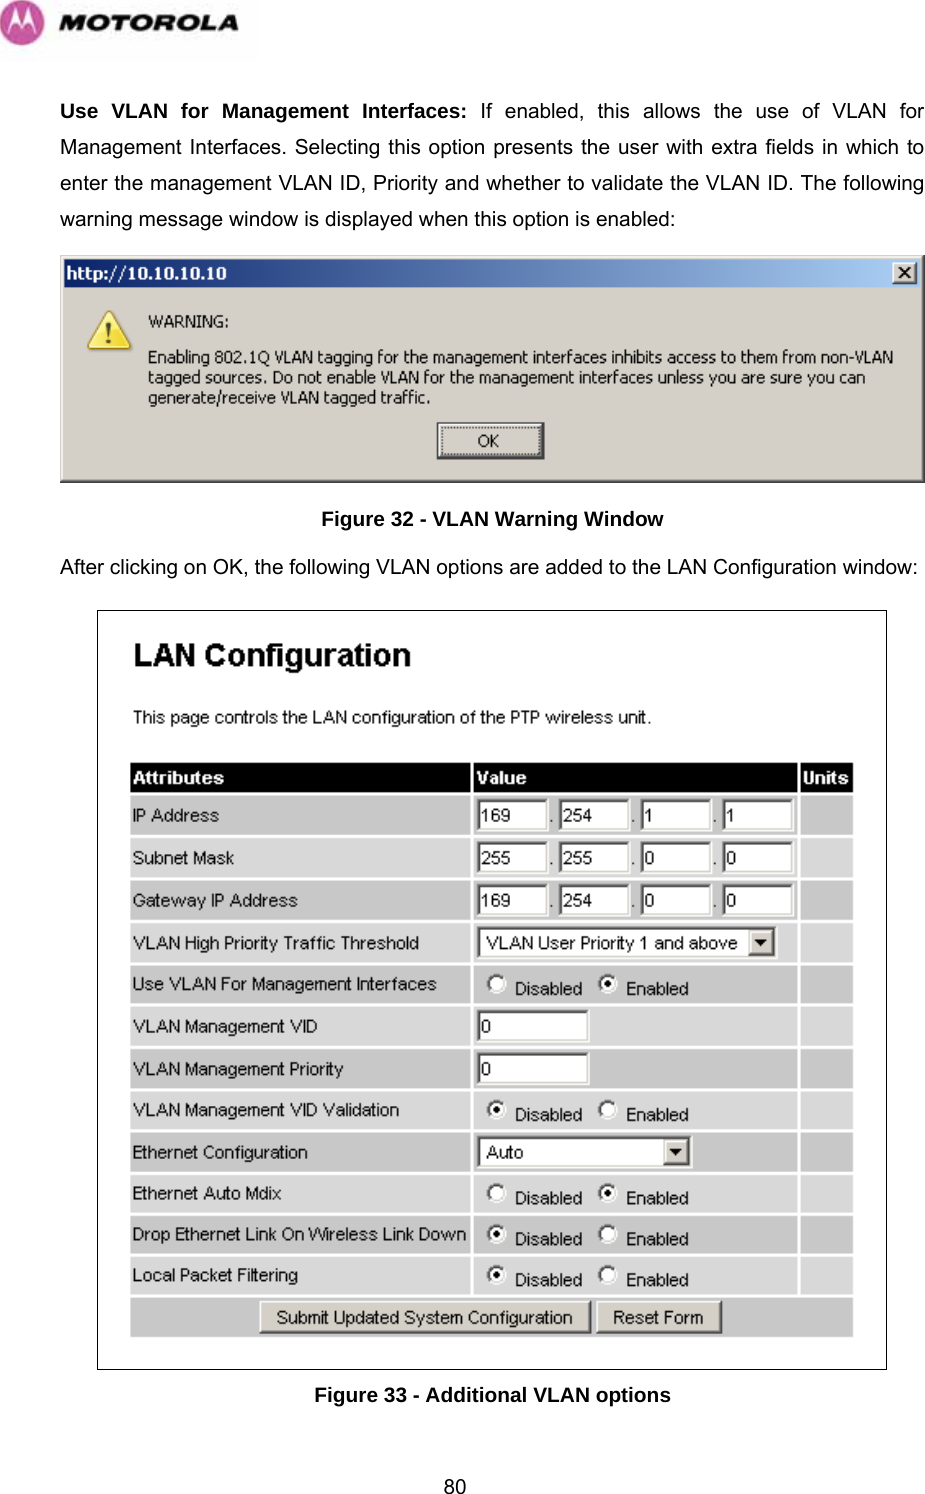   80Use VLAN for Management Interfaces: If enabled, this allows the use of VLAN for Management Interfaces. Selecting this option presents the user with extra fields in which to enter the management VLAN ID, Priority and whether to validate the VLAN ID. The following warning message window is displayed when this option is enabled:  Figure 32 - VLAN Warning Window After clicking on OK, the following VLAN options are added to the LAN Configuration window:   Figure 33 - Additional VLAN options 